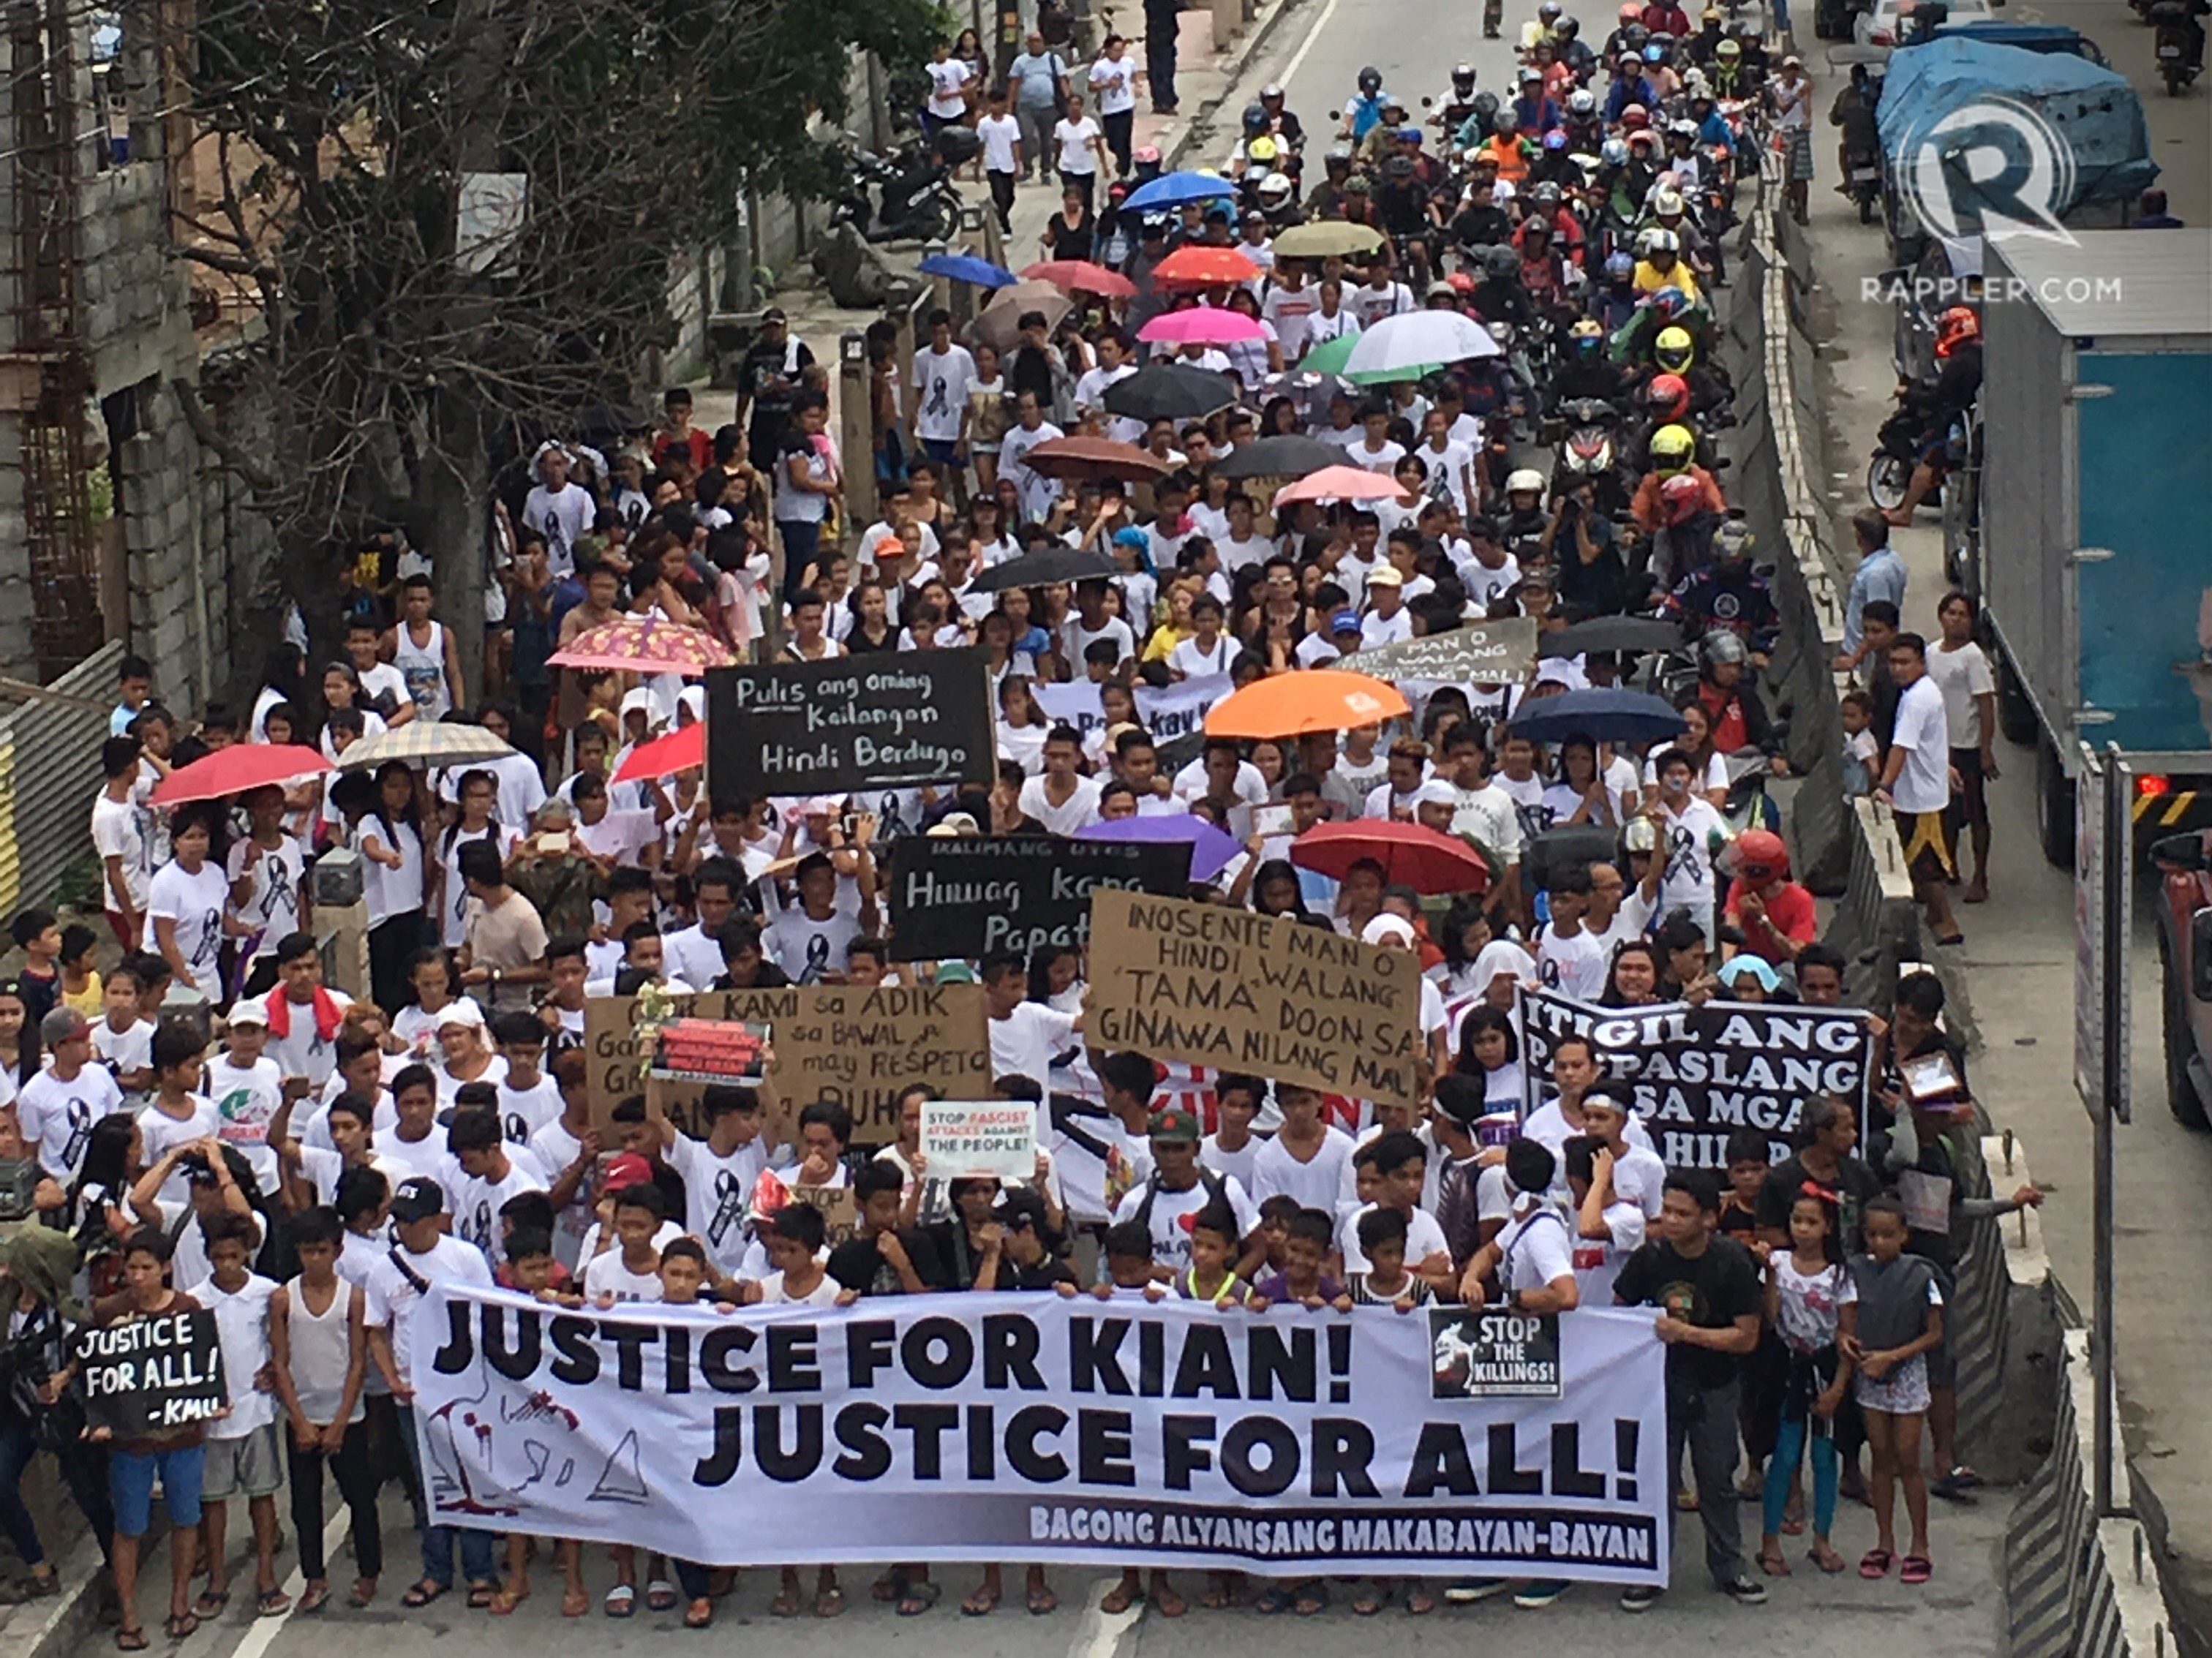 MARCH FOR JUSTICE. People in the funeral procession for Kian delos Santos hold up banners demanding justice for the slain teenager. Photo by Eloisa Lopez/Rappler 